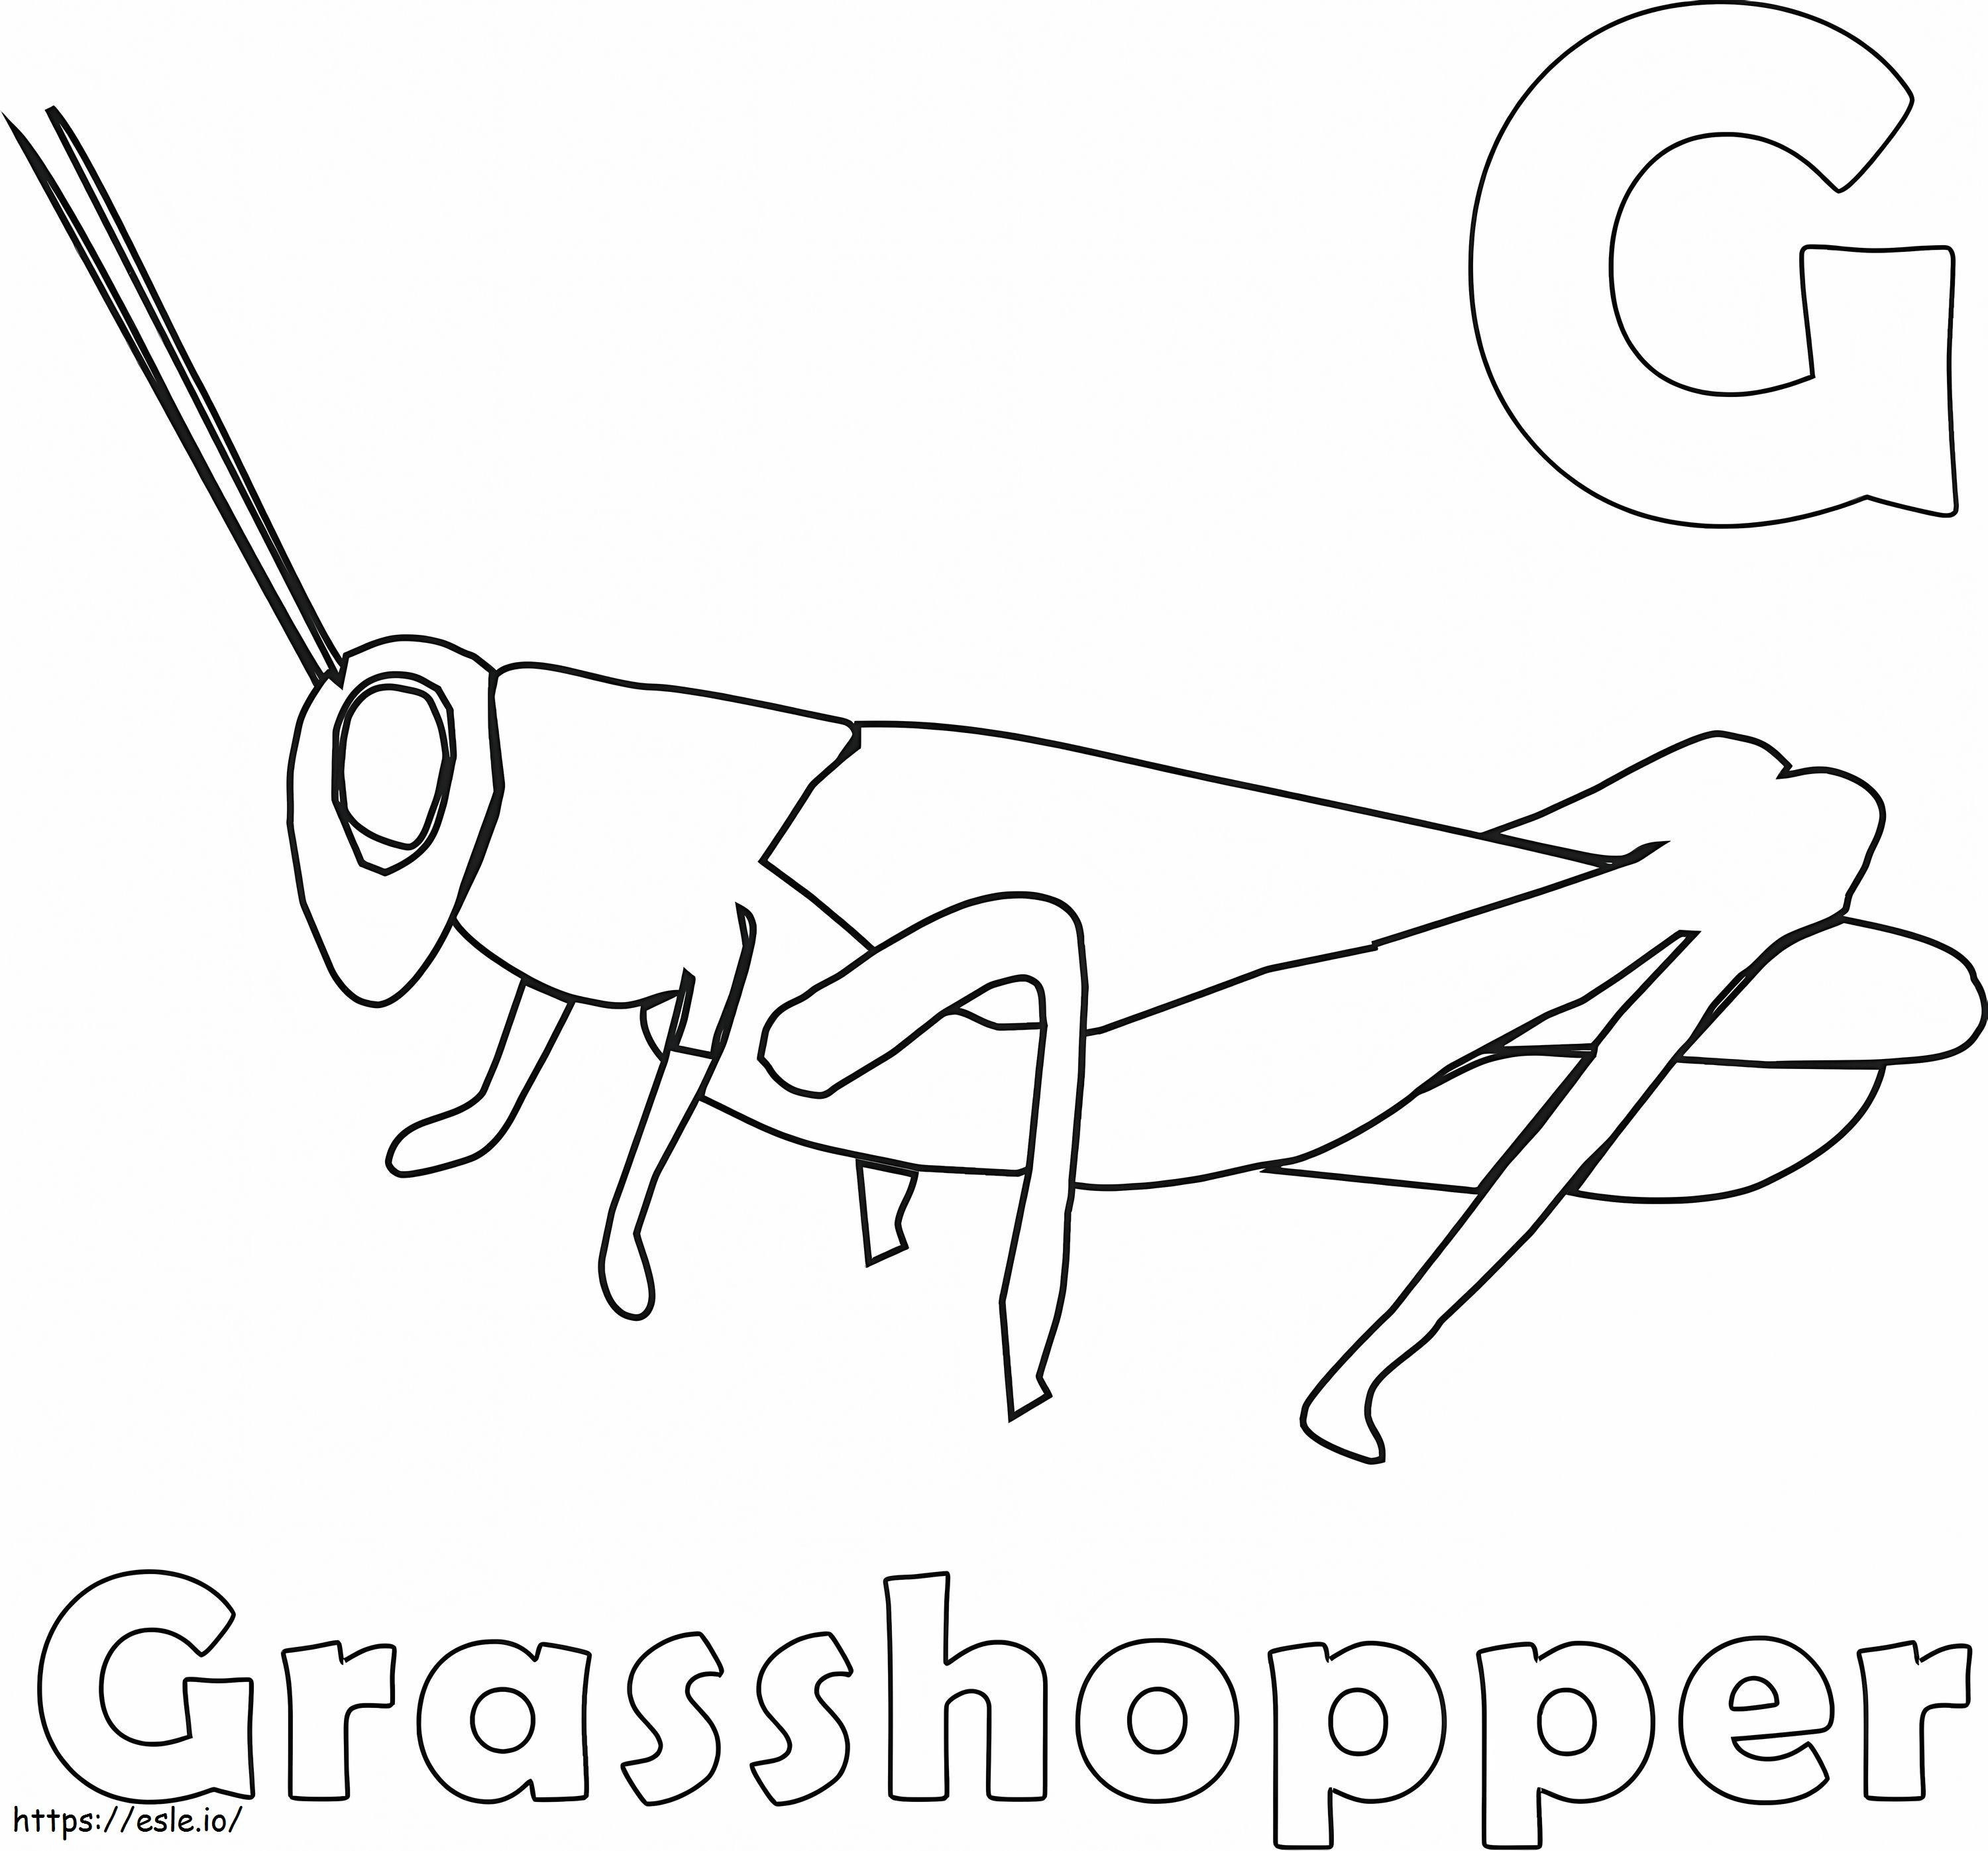 G And Grasshopper coloring page